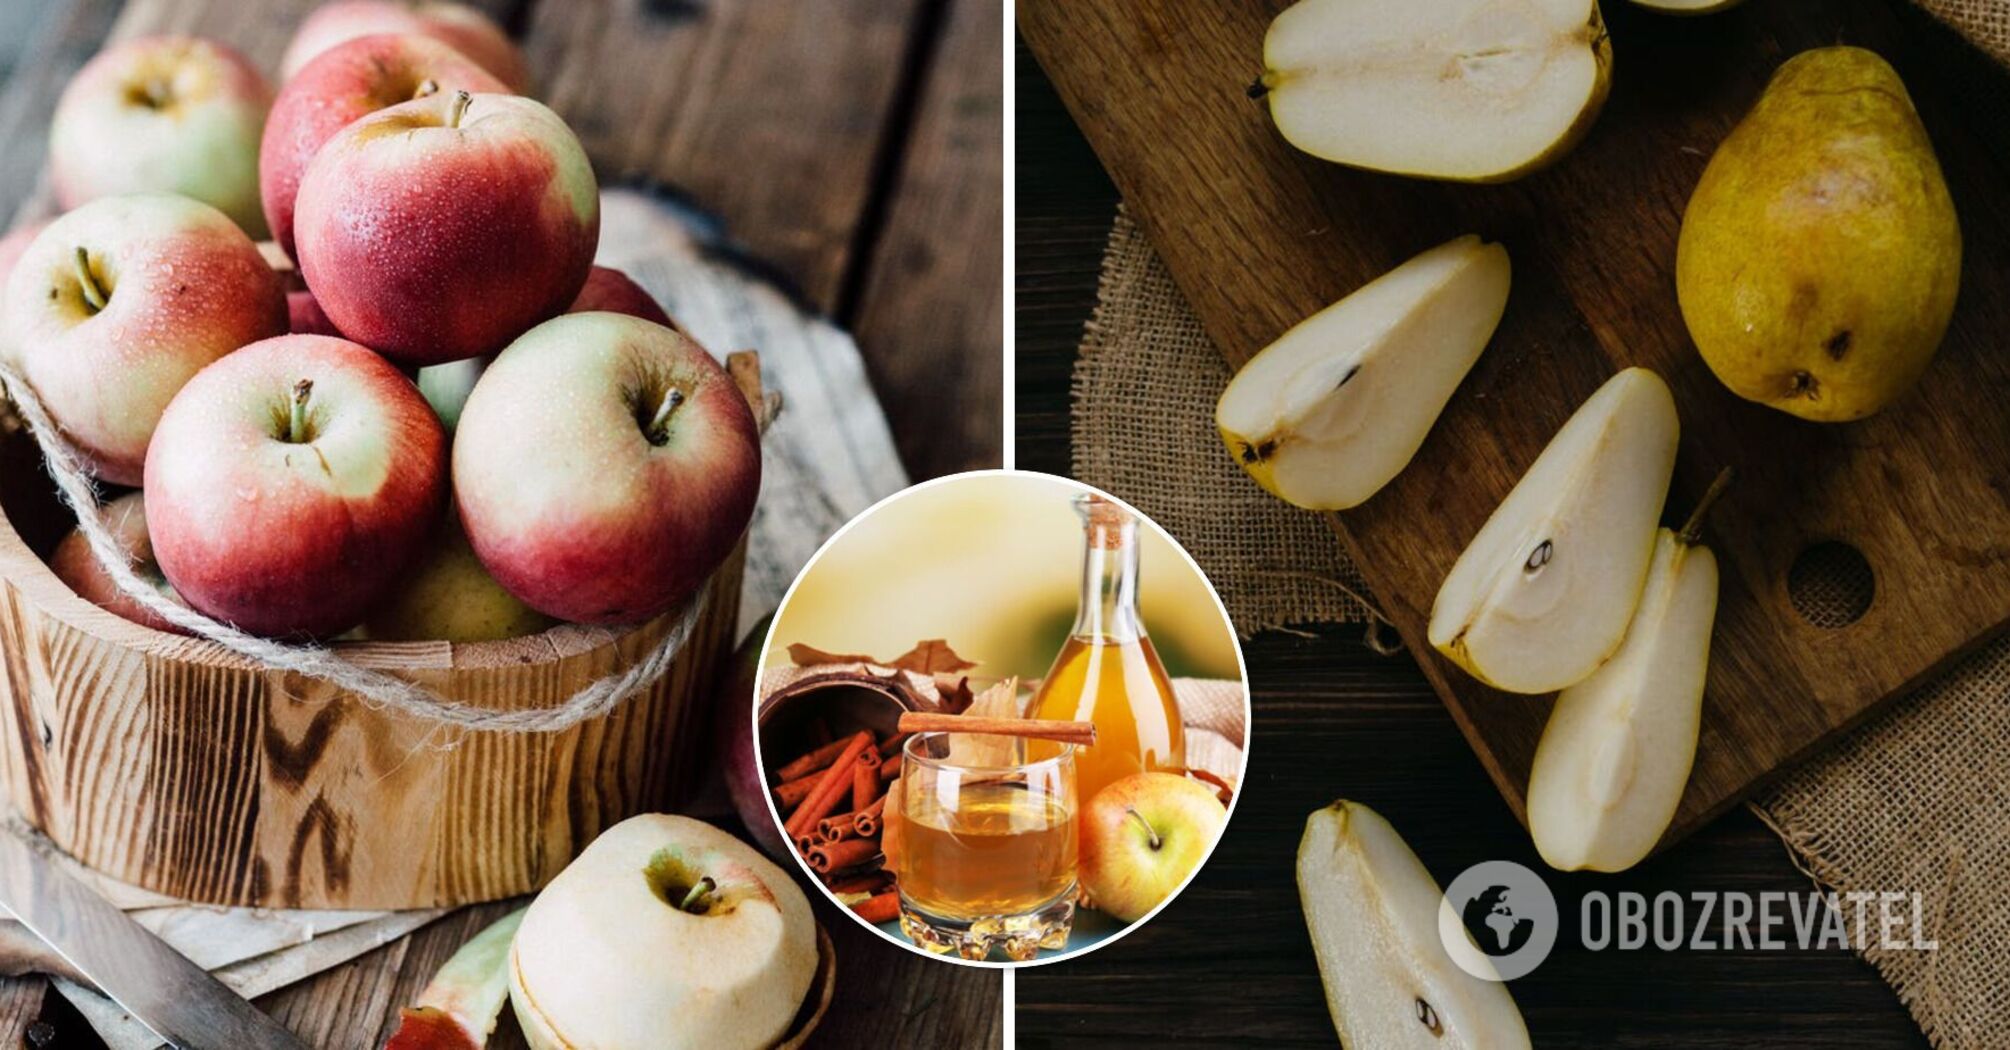 Cider at home: how to make a delicious drink